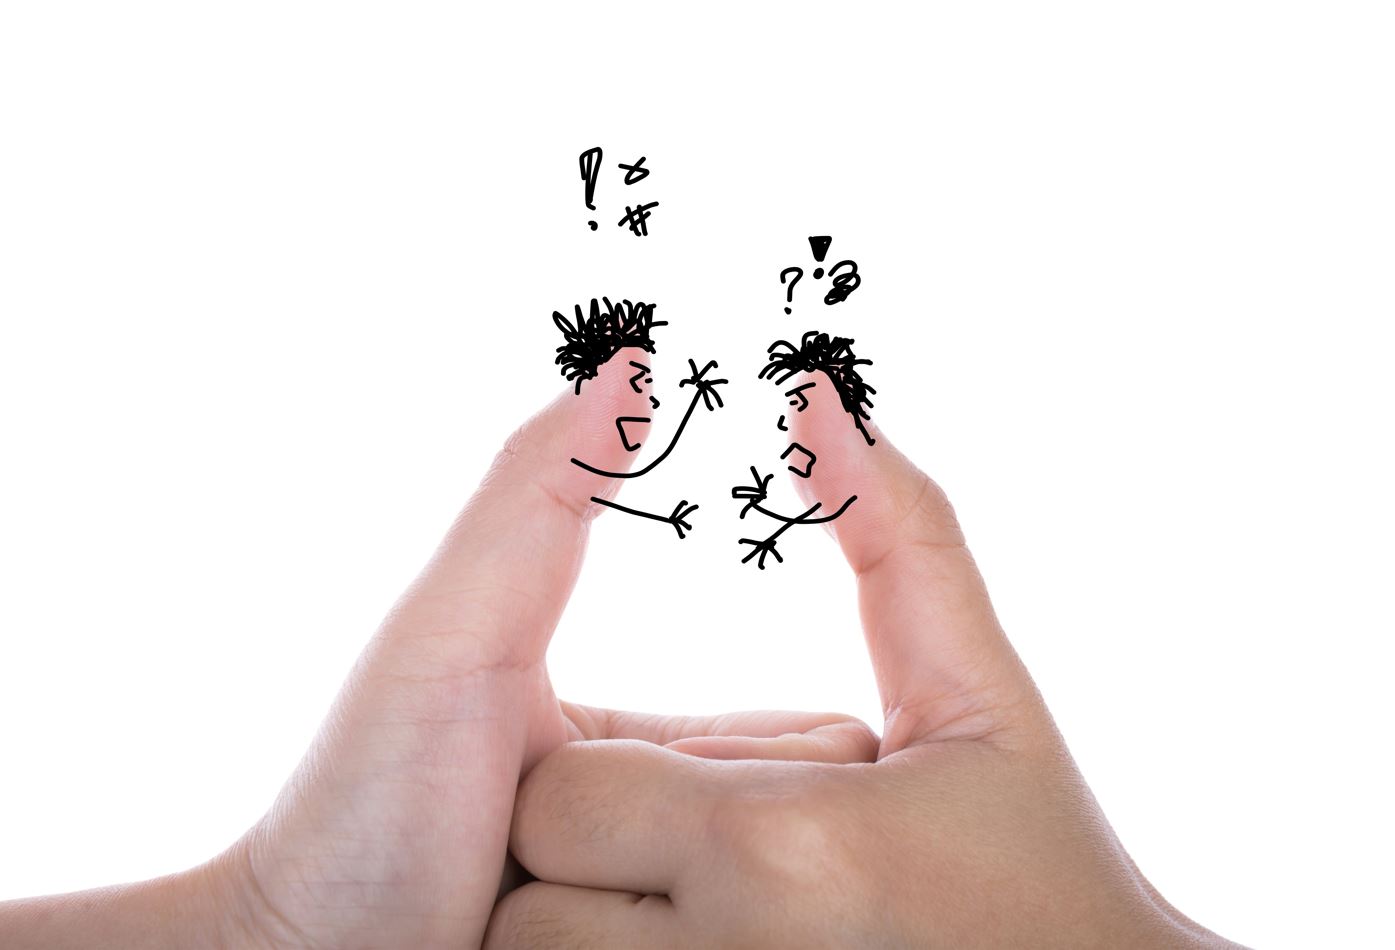 The best way to resolve conflict with peers  - Conflict with Peers